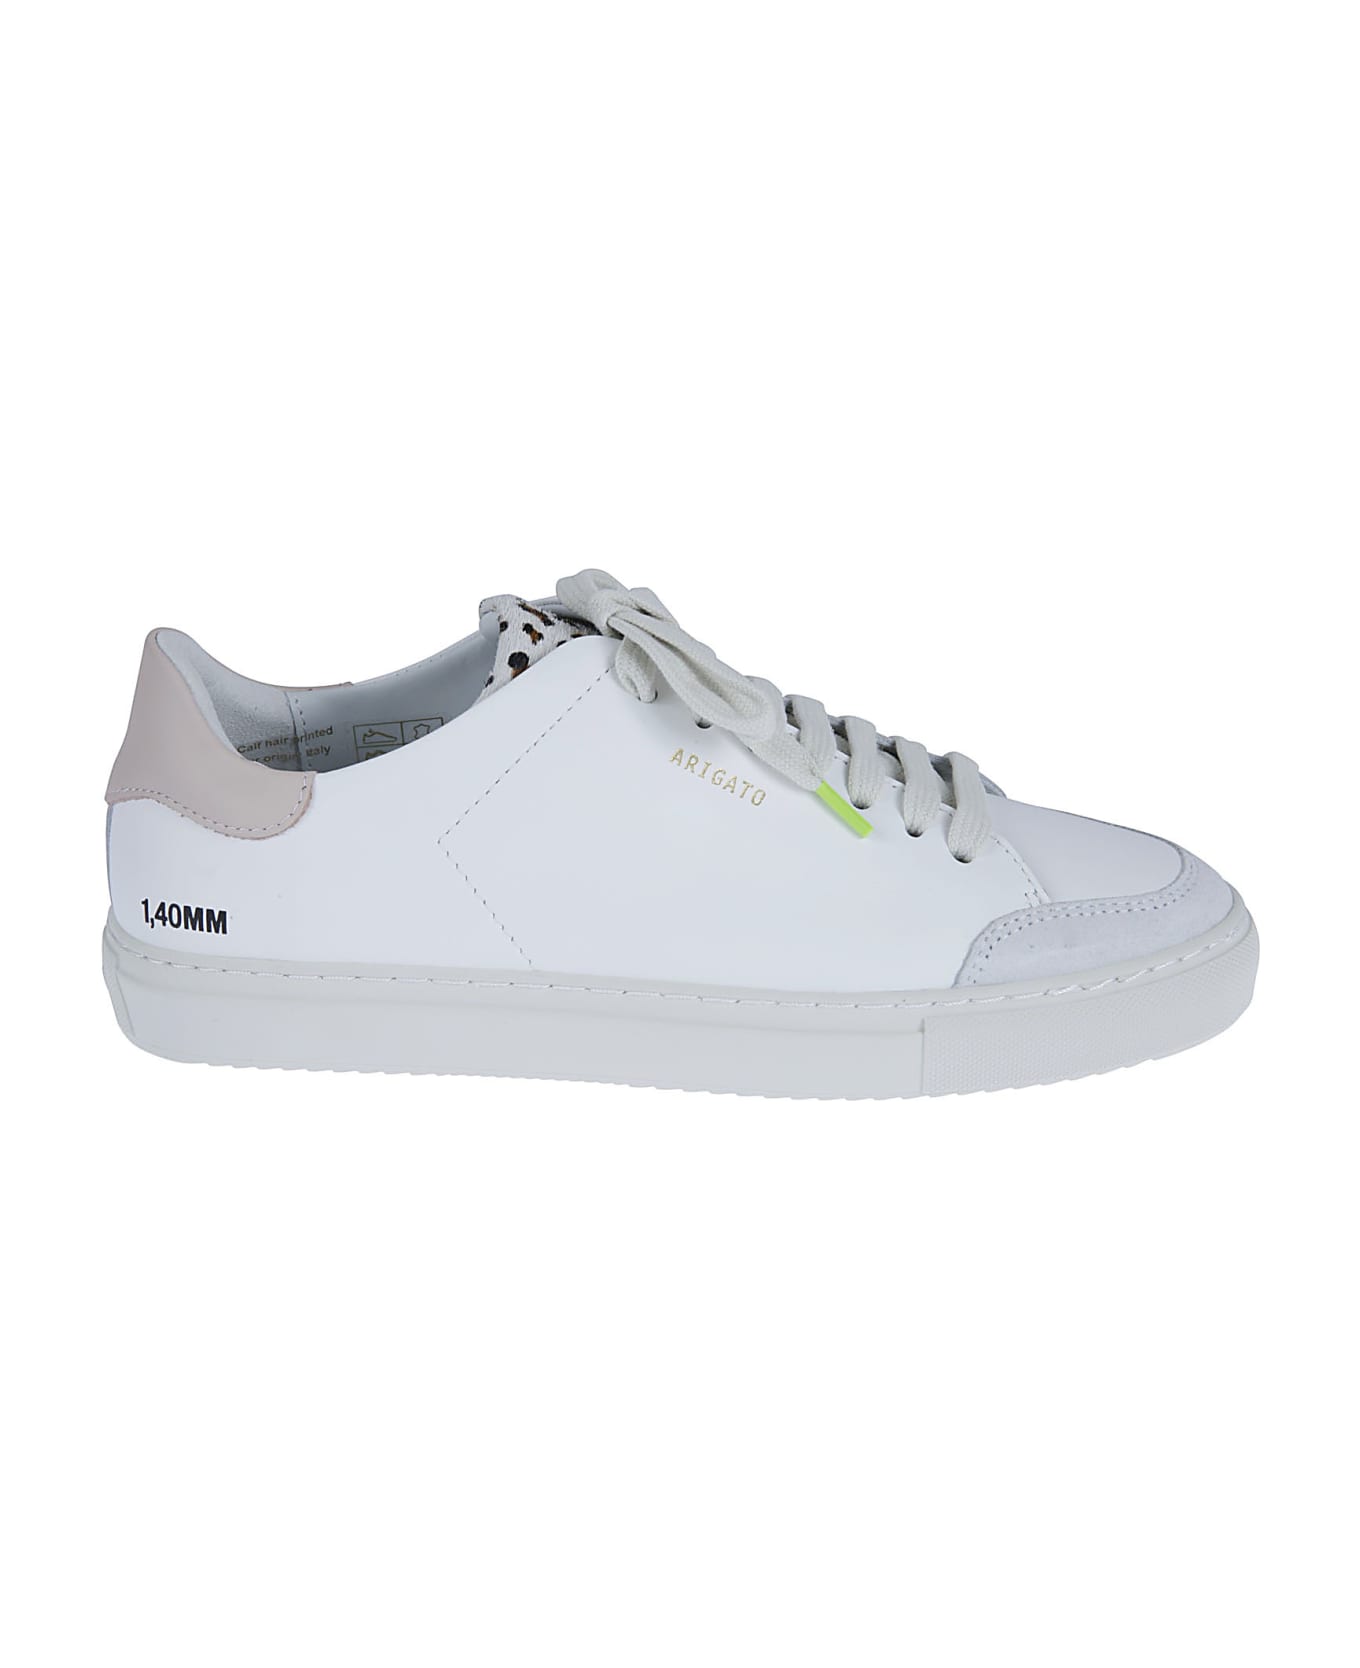 Axel Arigato Triple Animal Sneakers - White/Dusty Pink スニーカー